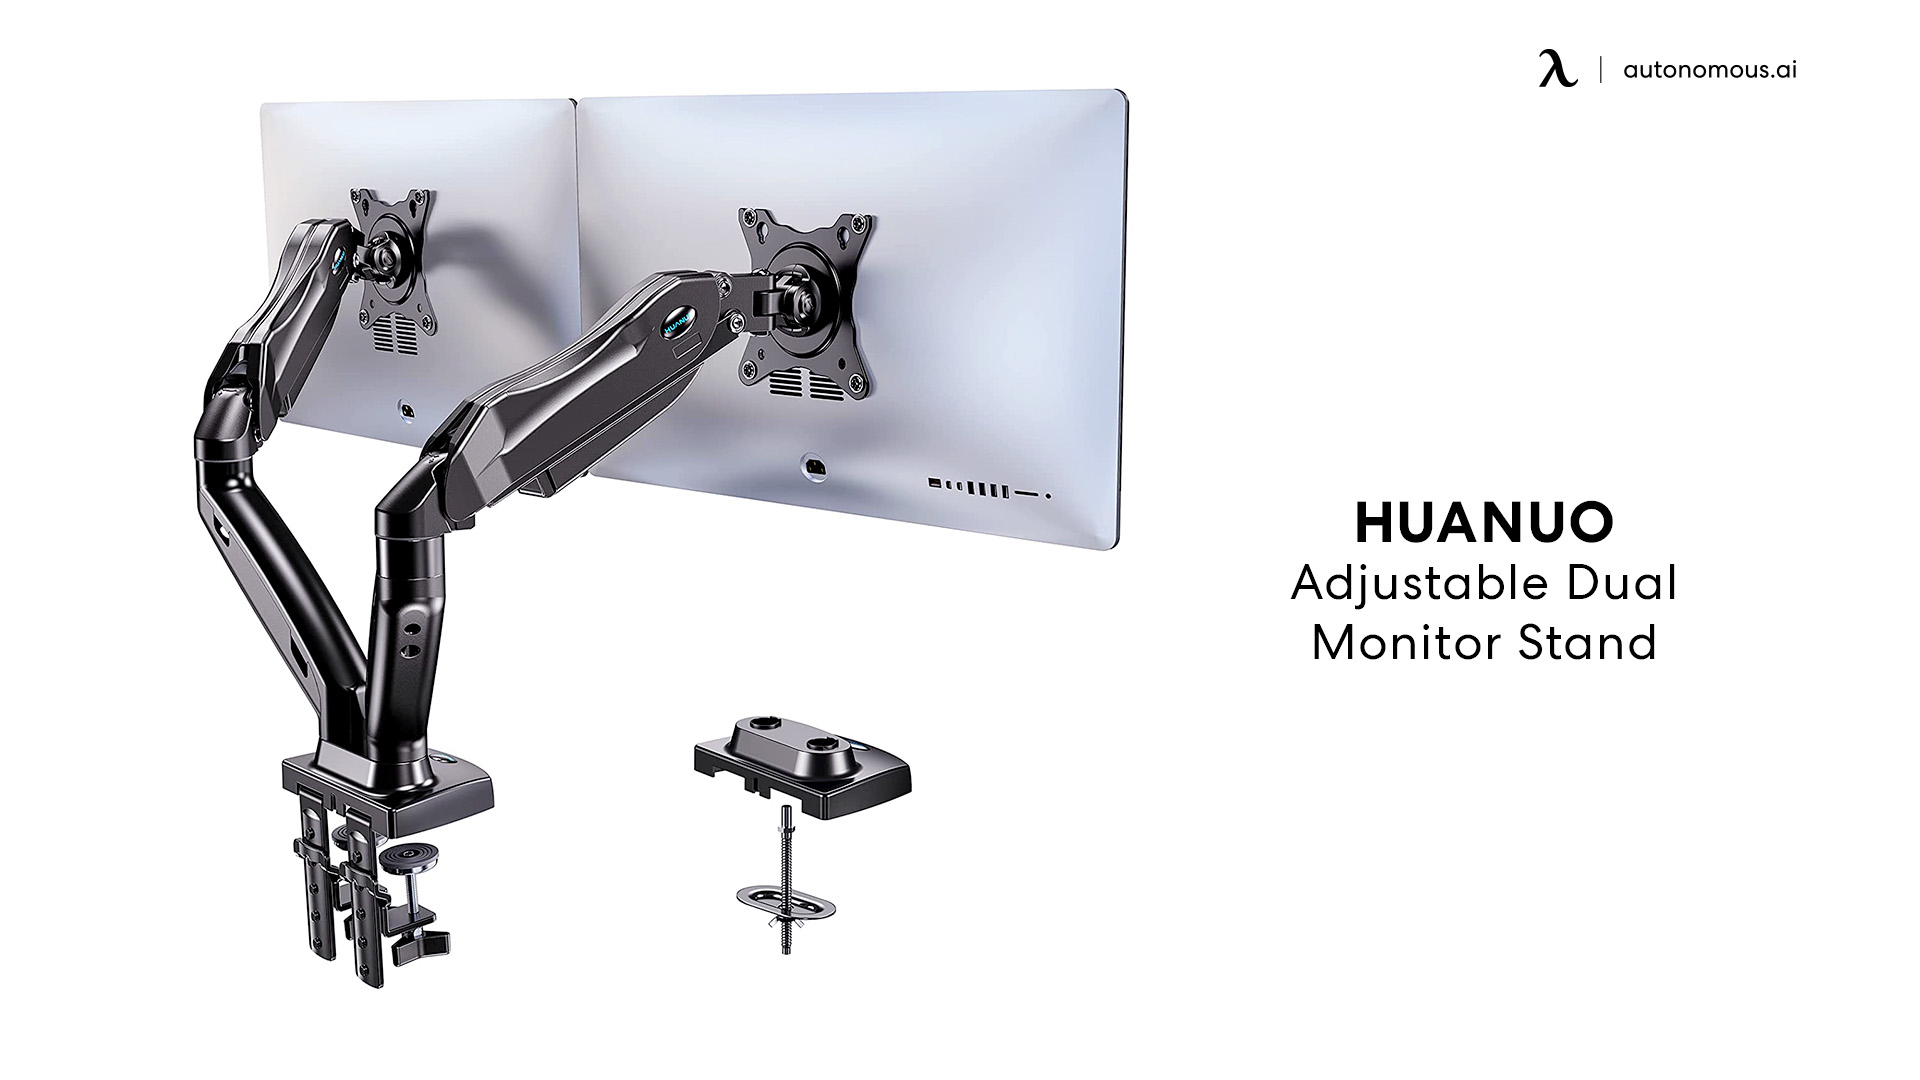 Huanuo Adjustable Dual Monitor Stand